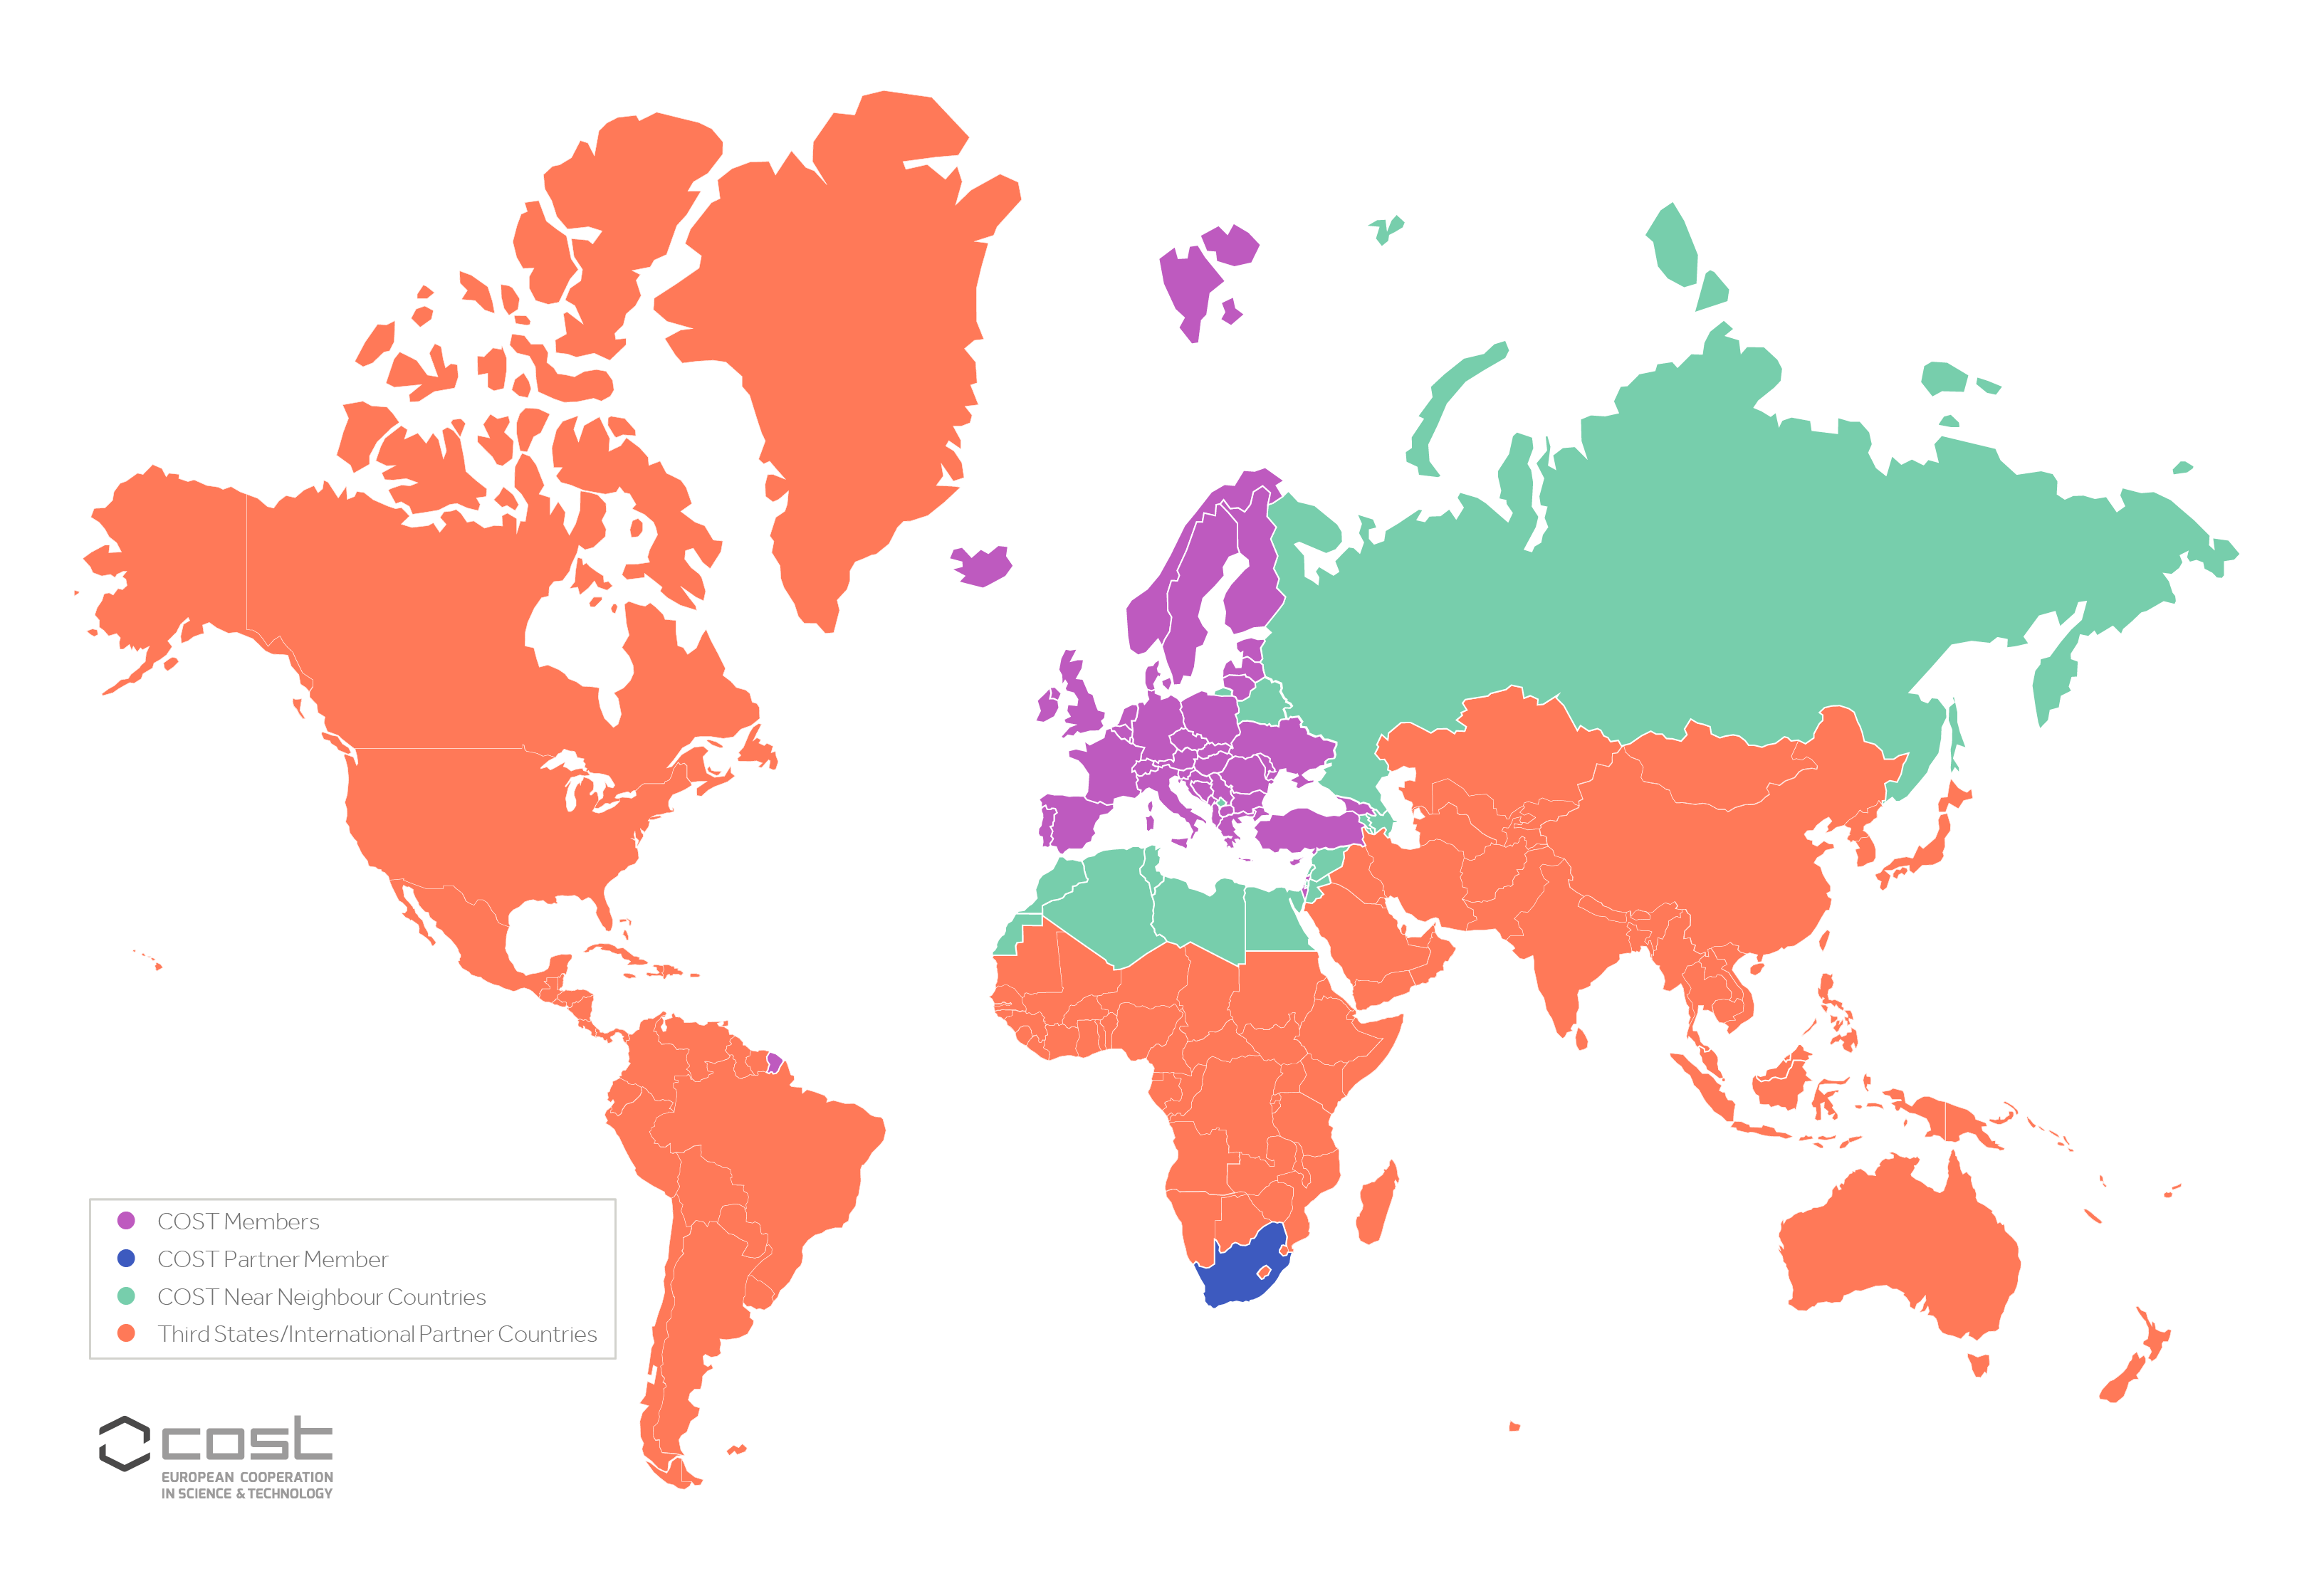 World map with countries shaded in purple, green, orange, and blue depending on their relationship to COST